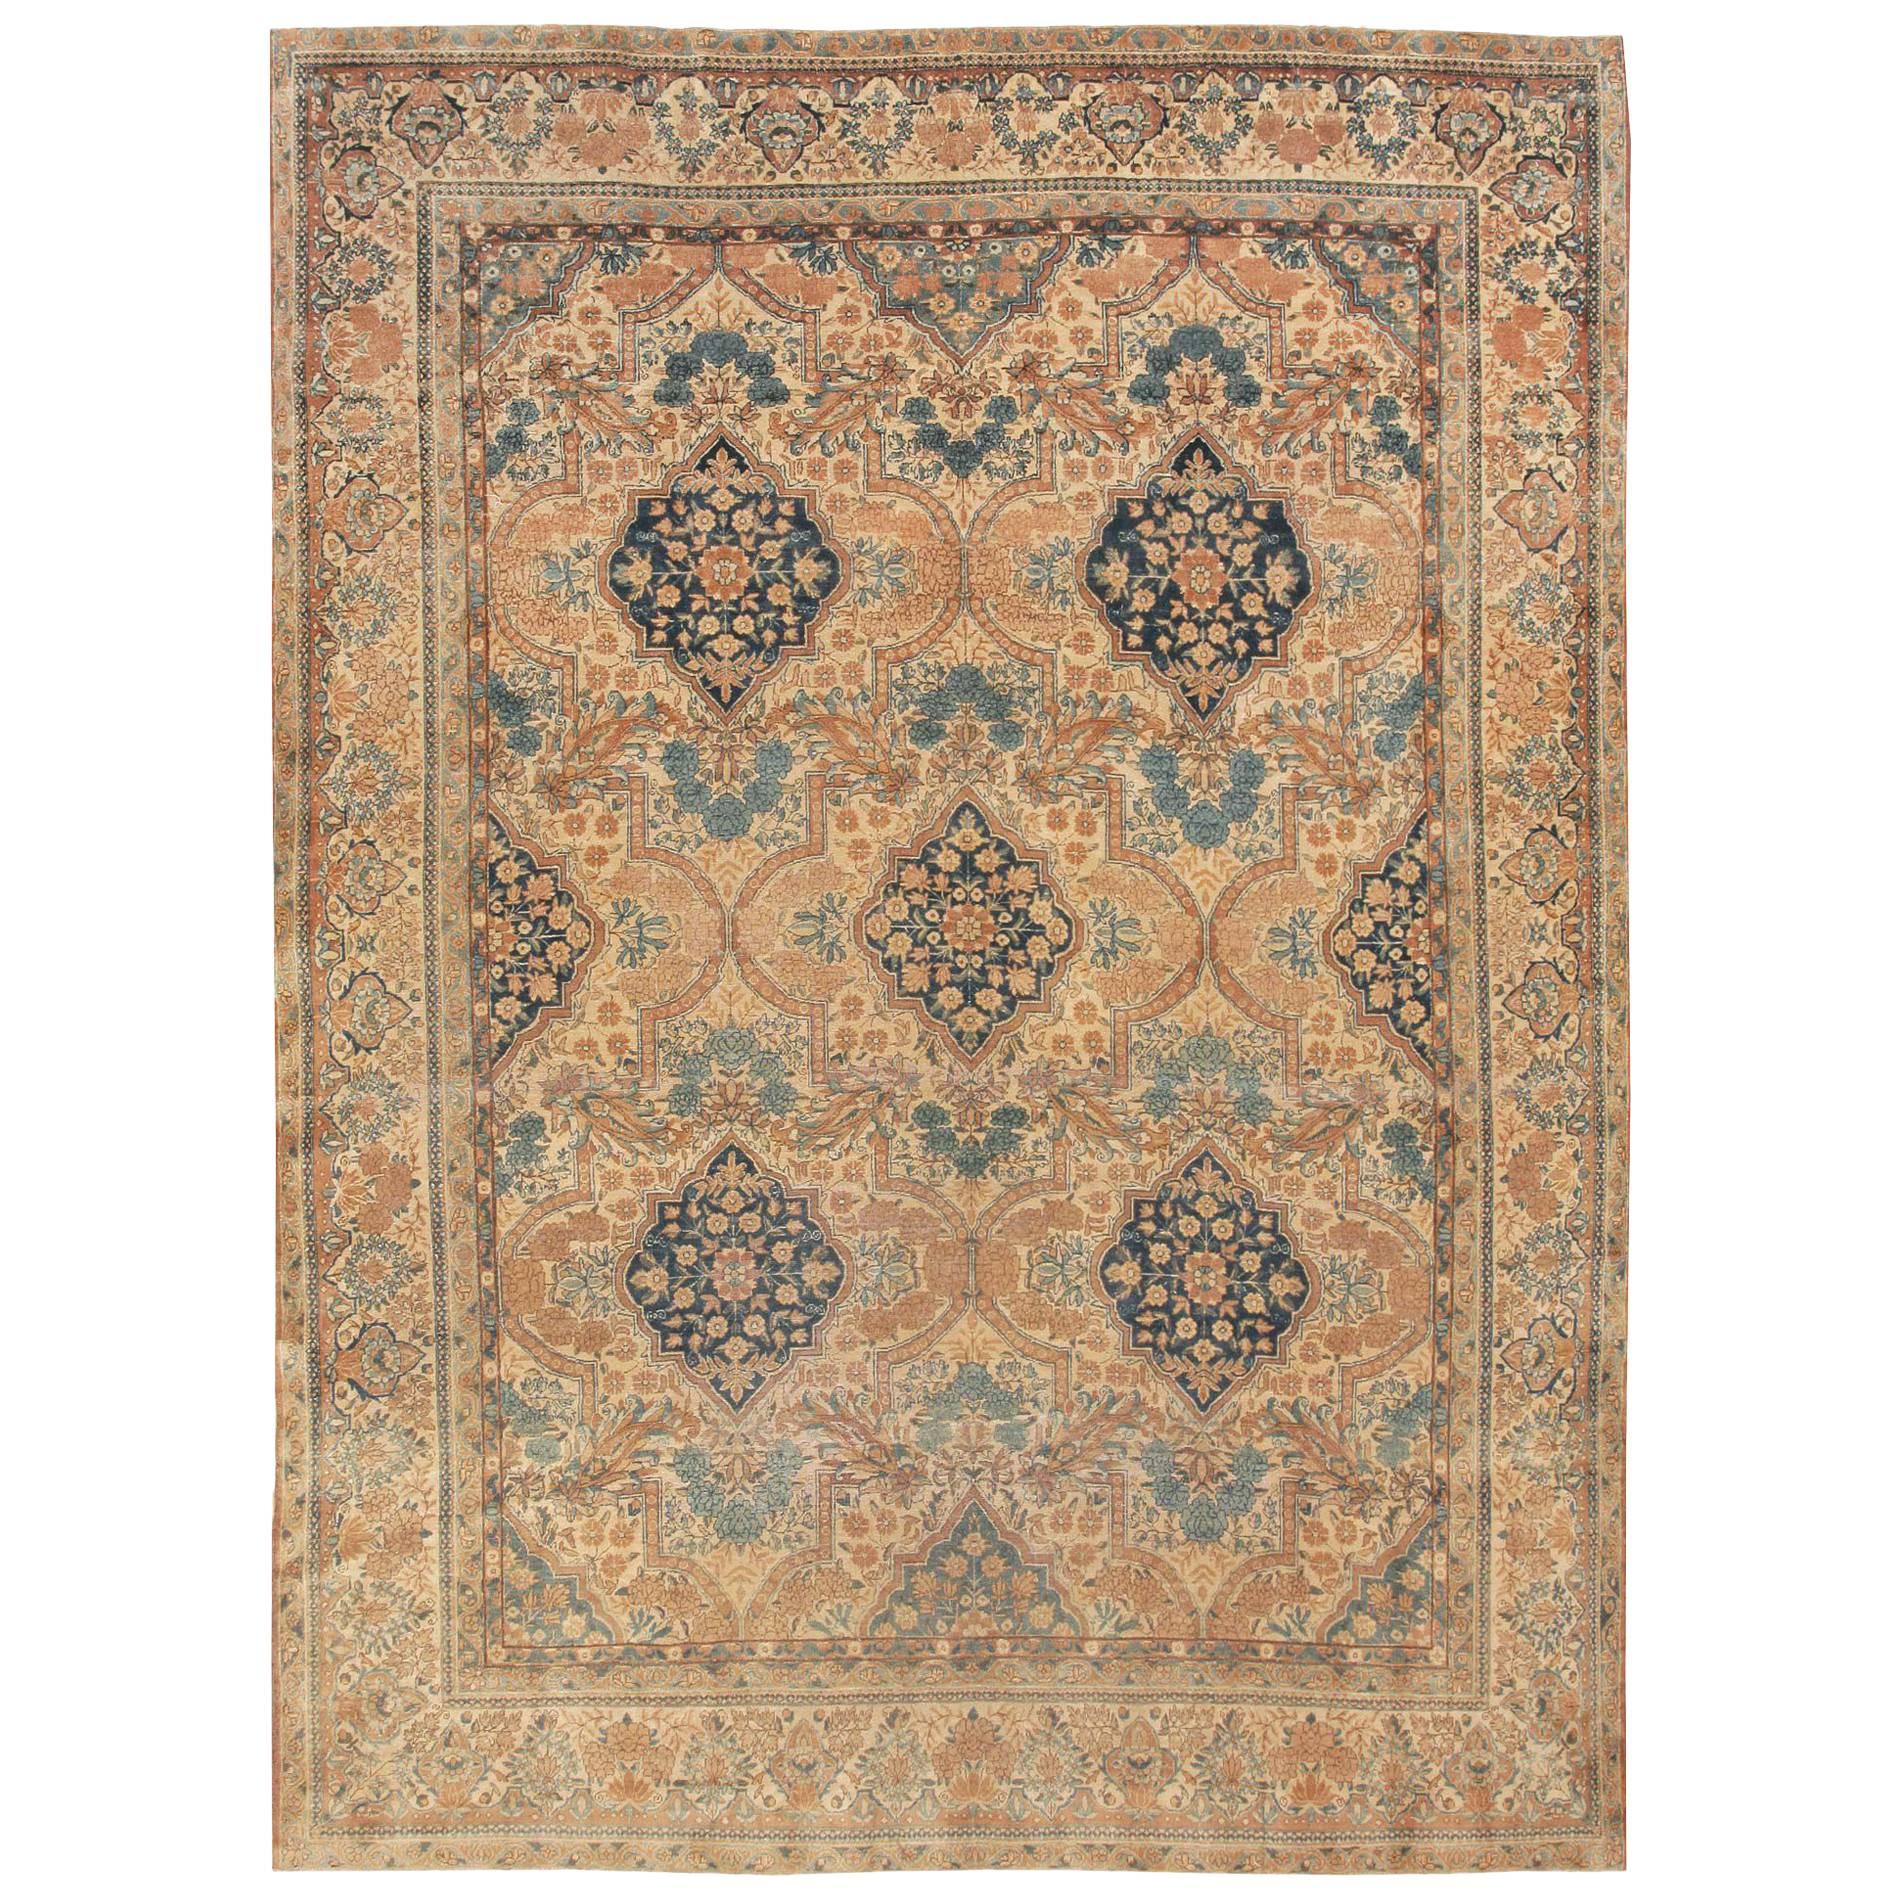 Antique Persian Kerman Rug. Size: 10 ft 6 in x 14 ft 2 in (3.2 m x 4.32 m)